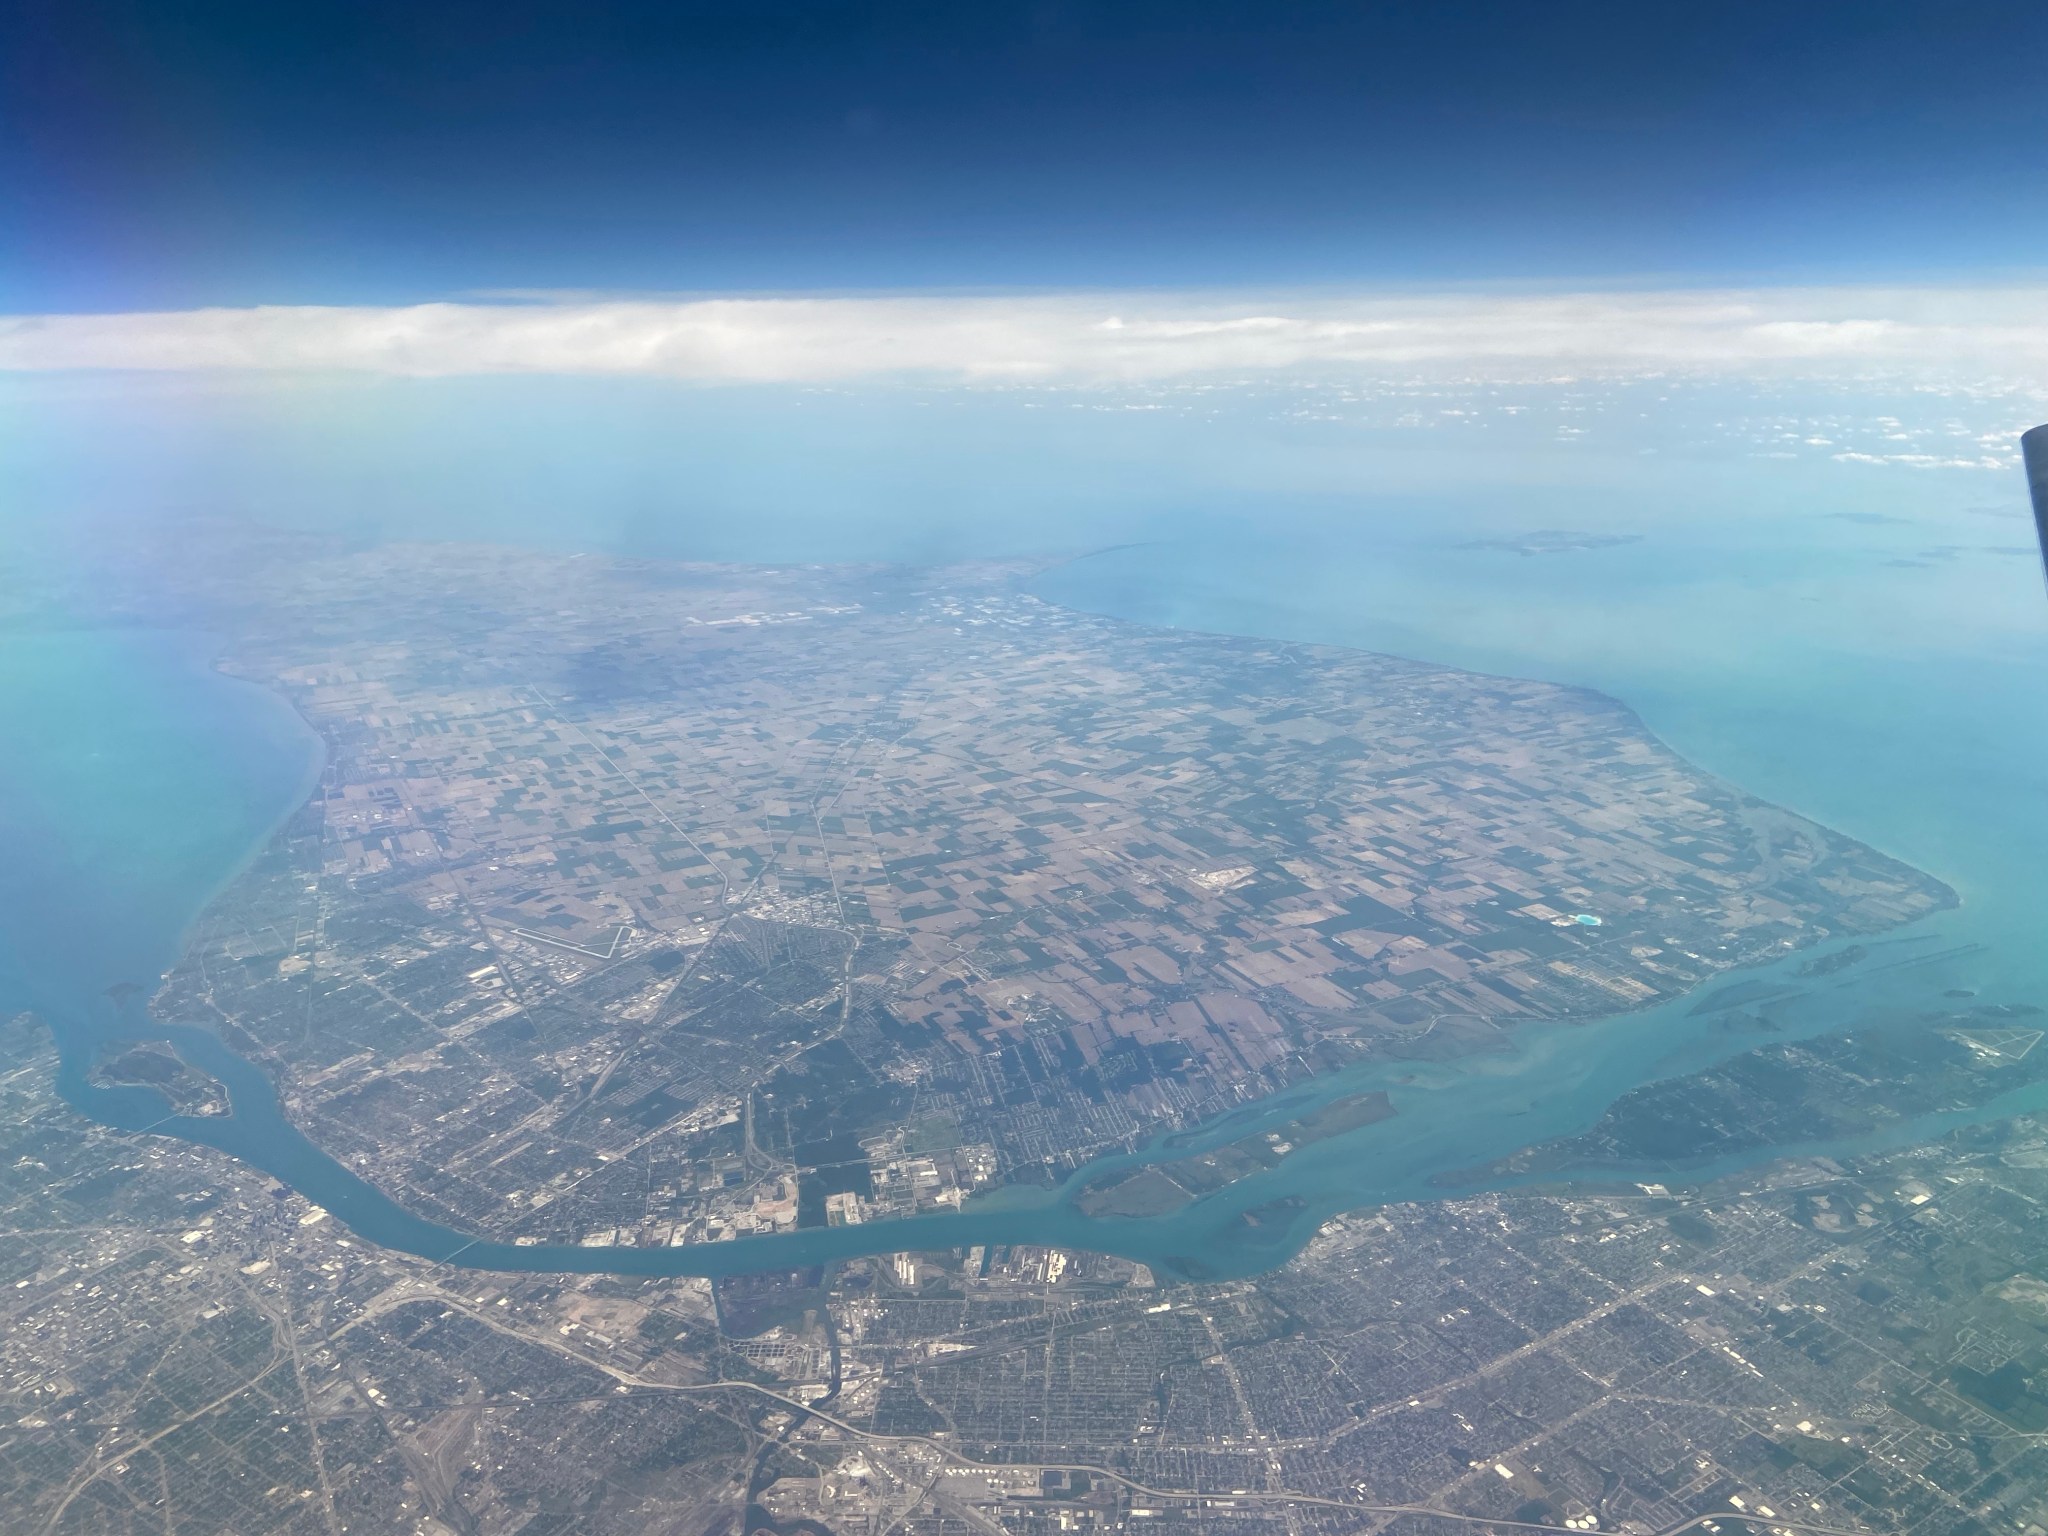 A view of the MOOSE study region from the Langley C-20B Gulfstream III. On the far side is the city of Windsor in Ontario, Canada. Detroit is in the foreground, with downtown Detroit on the lower left. The Detroit River runs between the two cities.